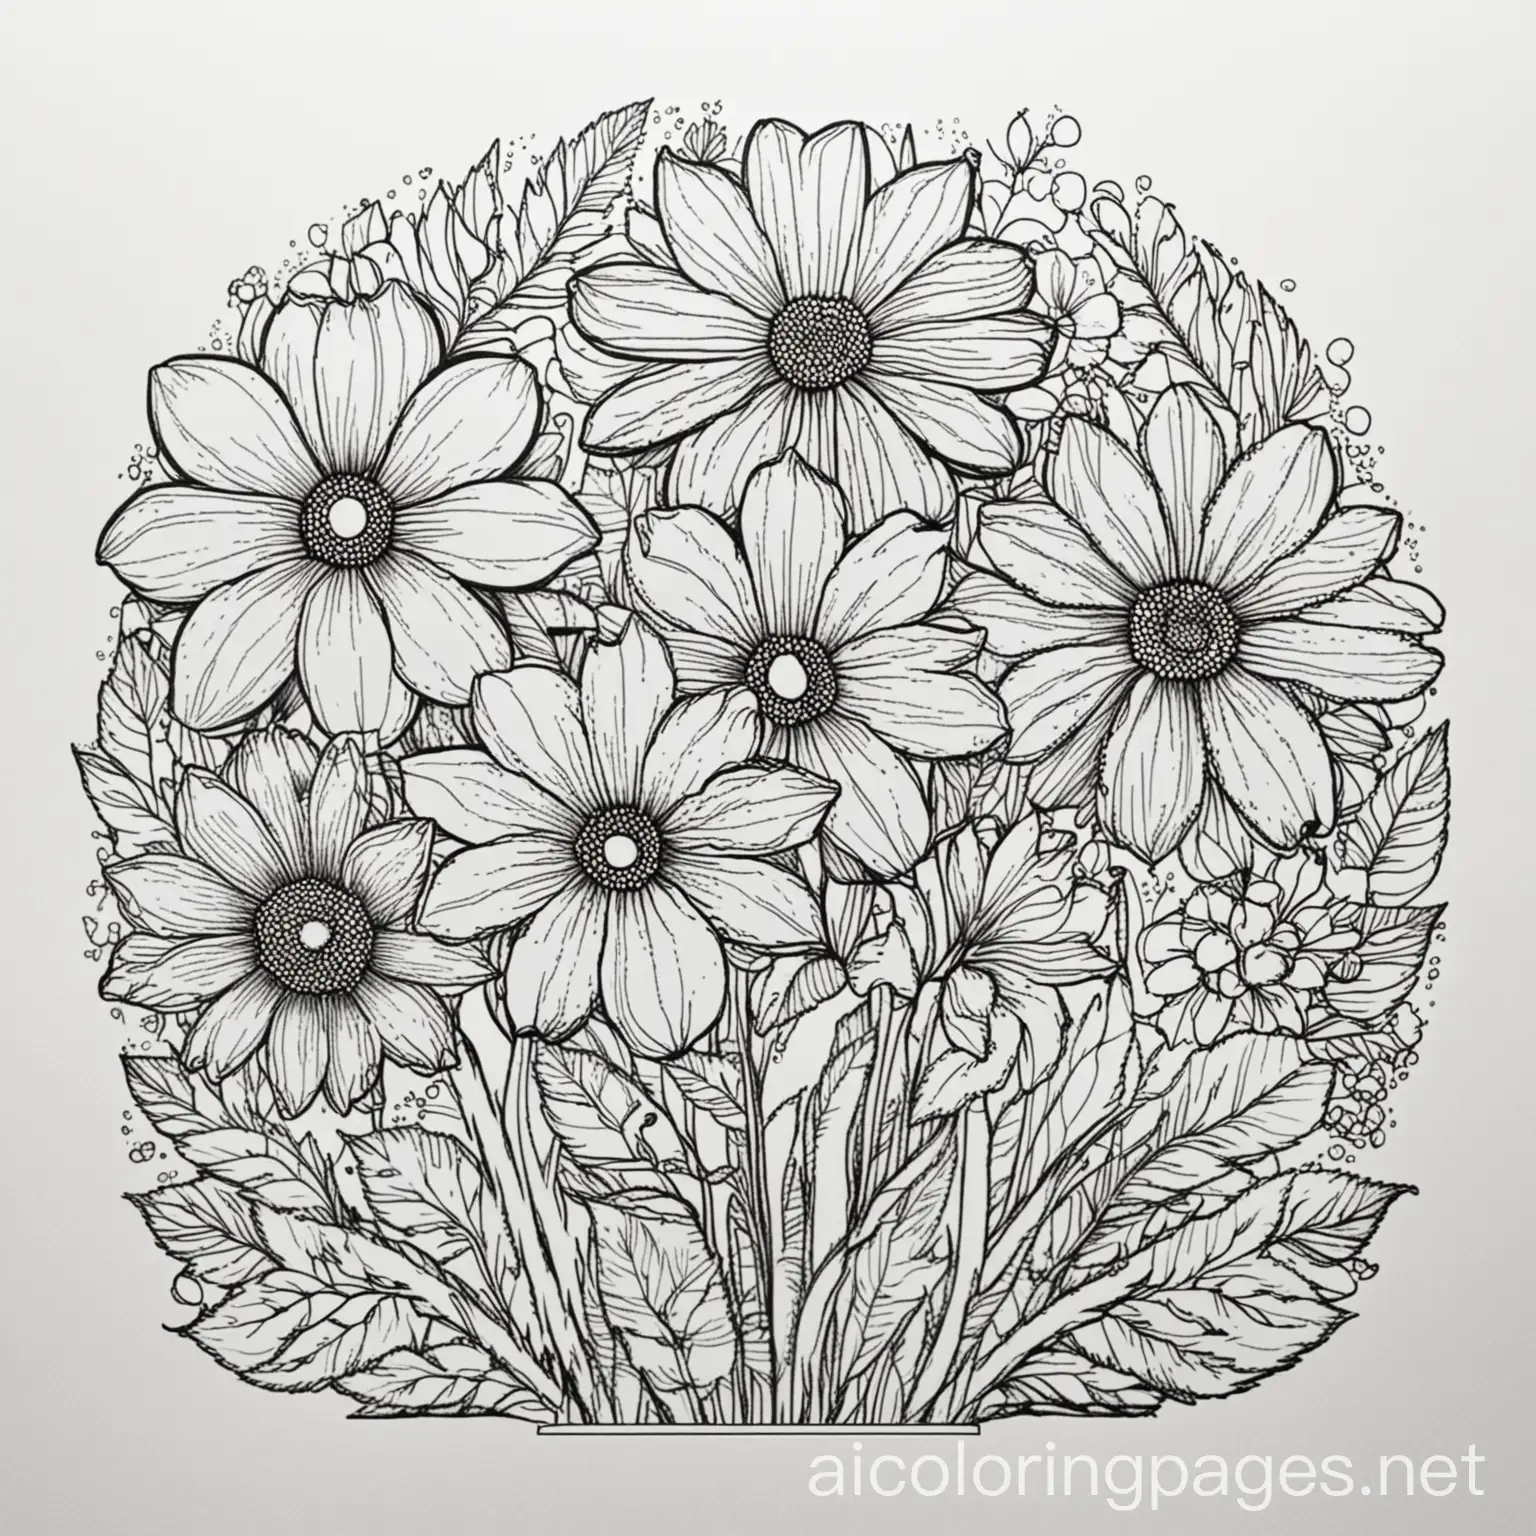 Mandela-Flowers-Coloring-Page-for-Kids-Black-and-White-Line-Art-on-White-Background